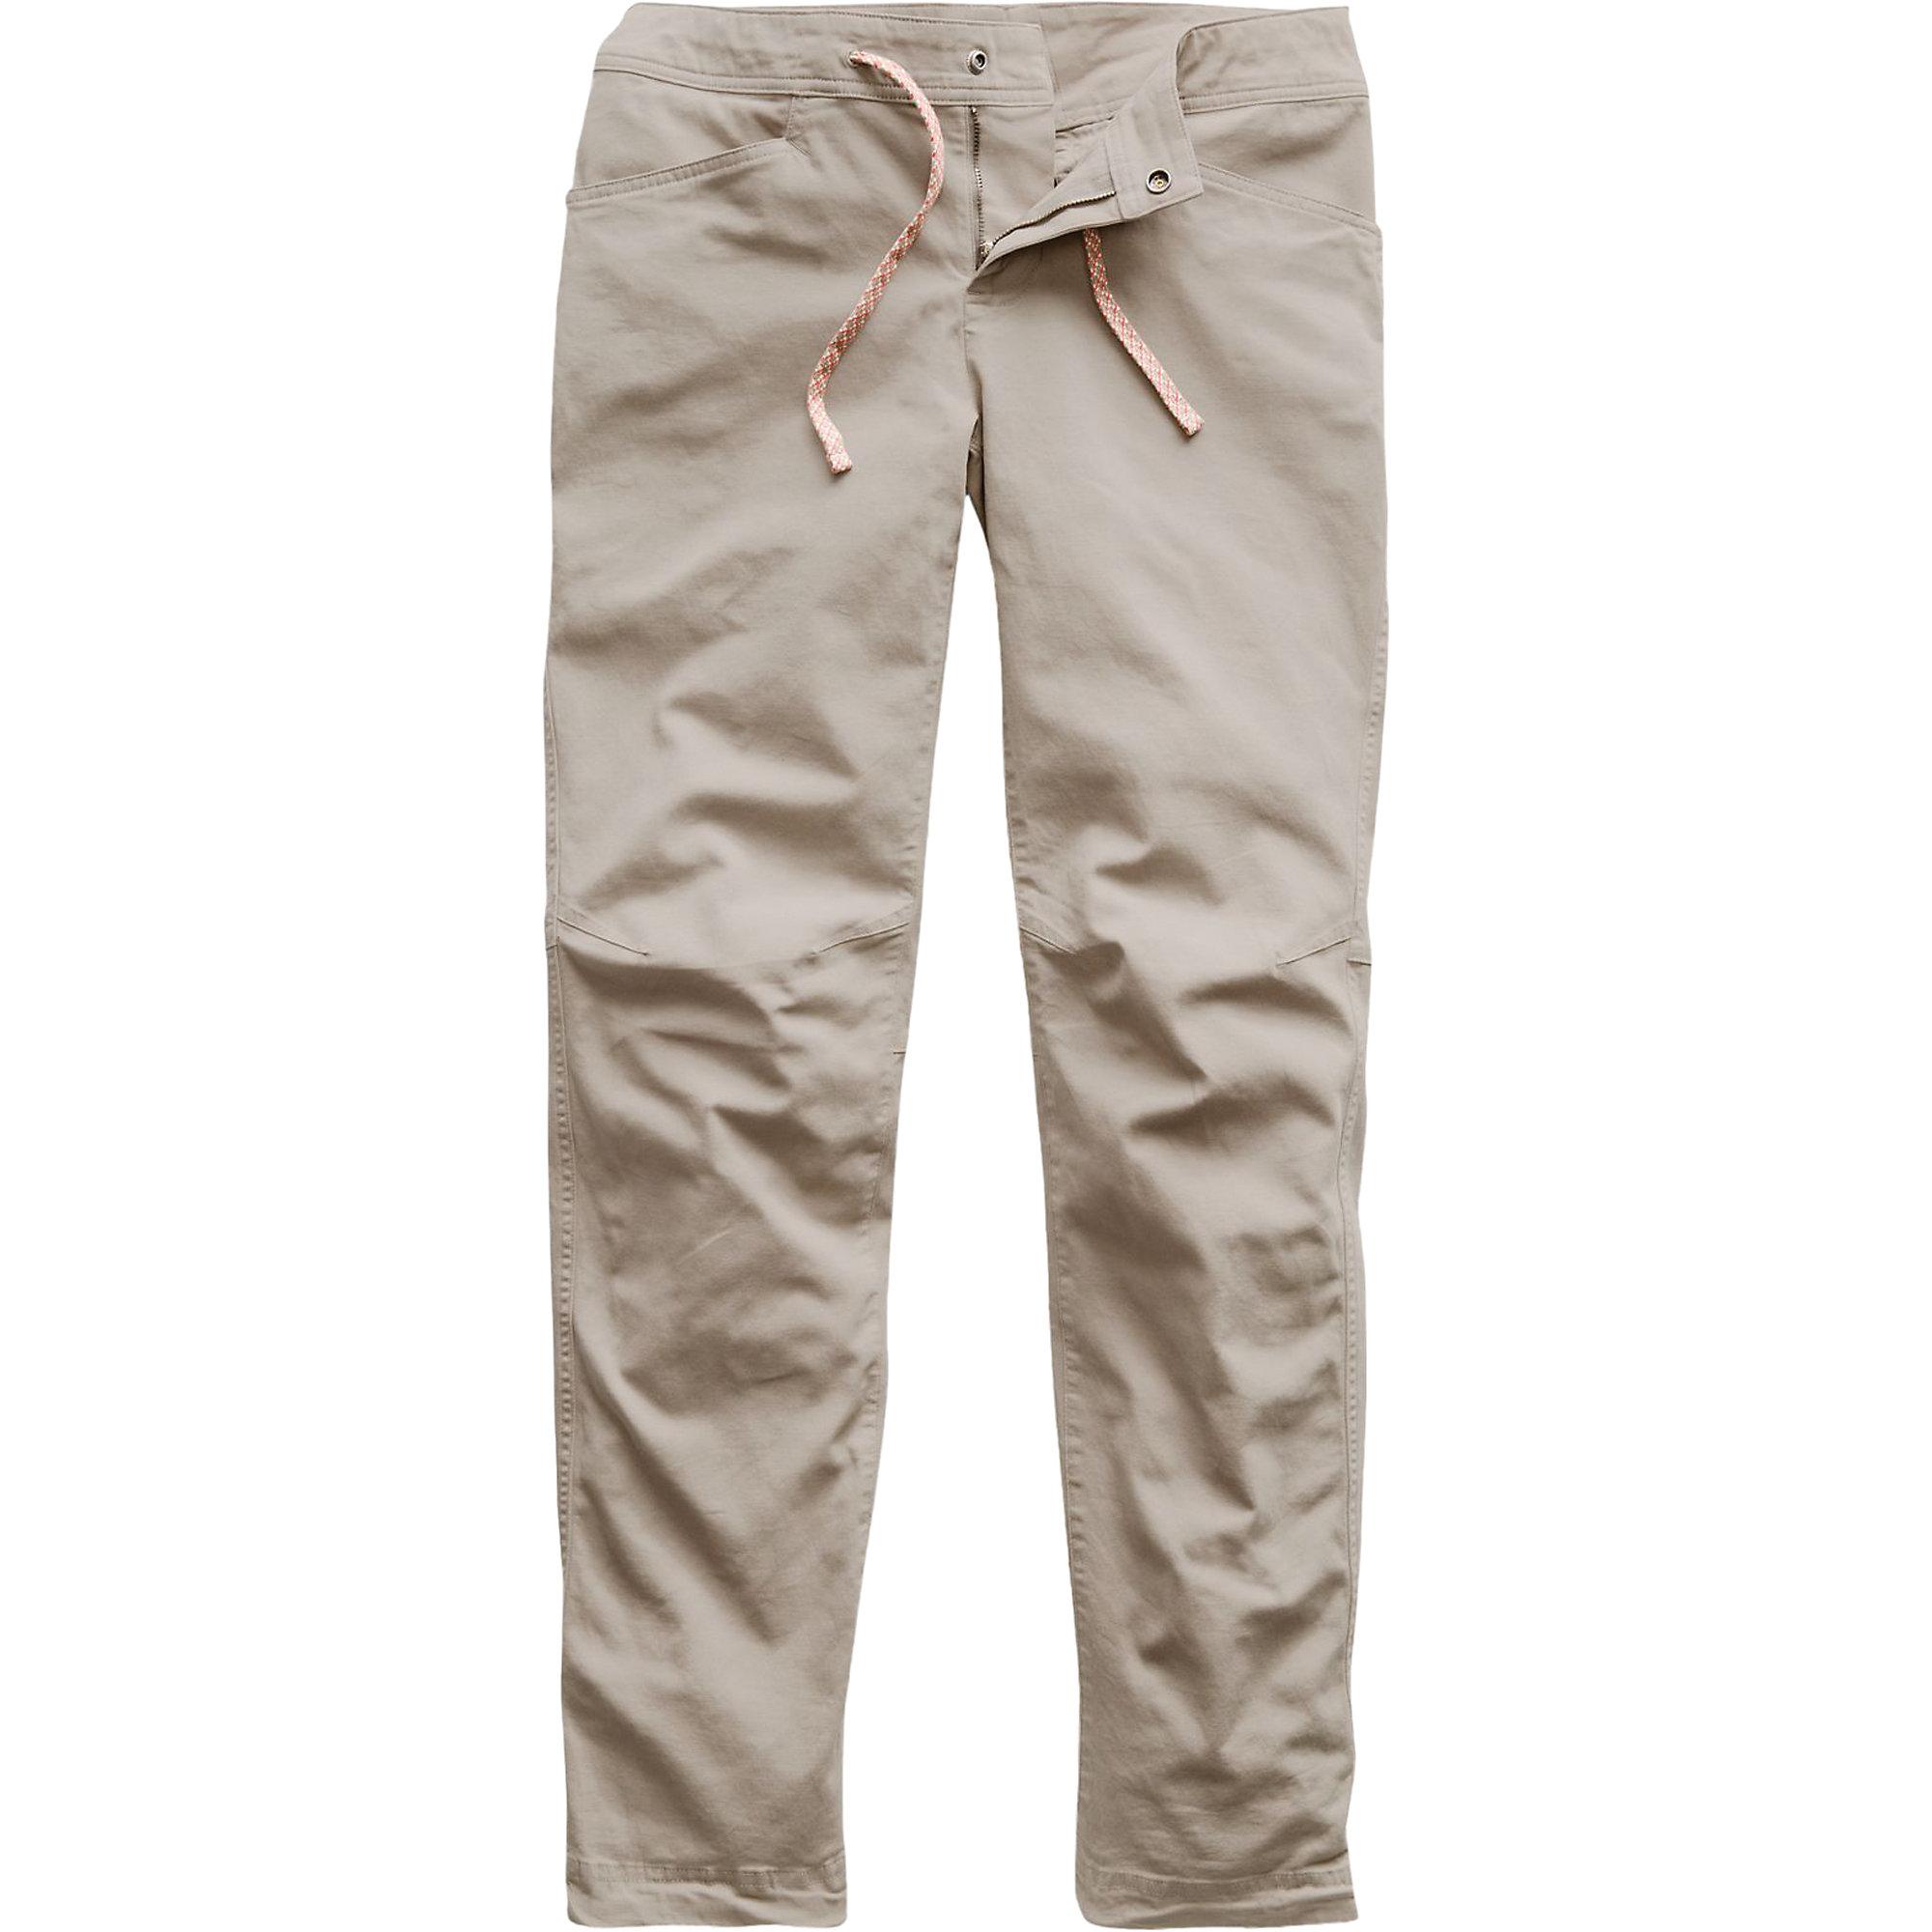 north face dome pants